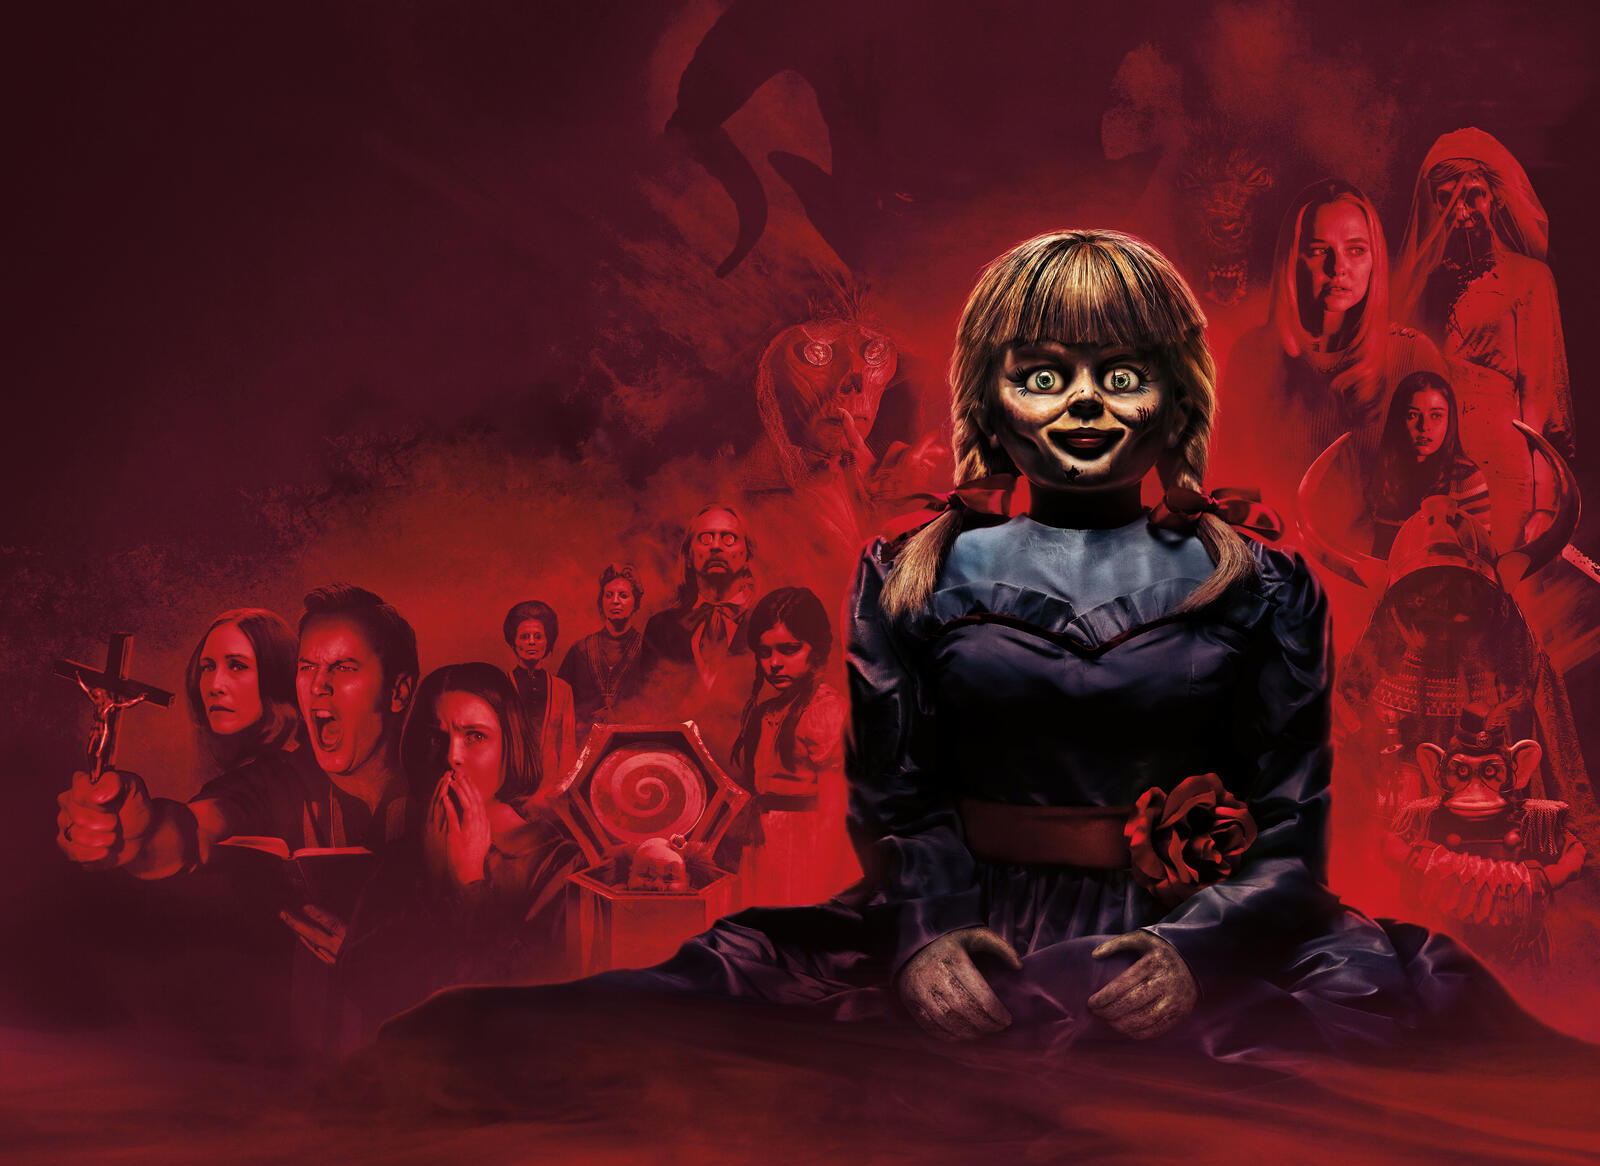 Wallpapers annabelle comes home movies 2019 Movies on the desktop